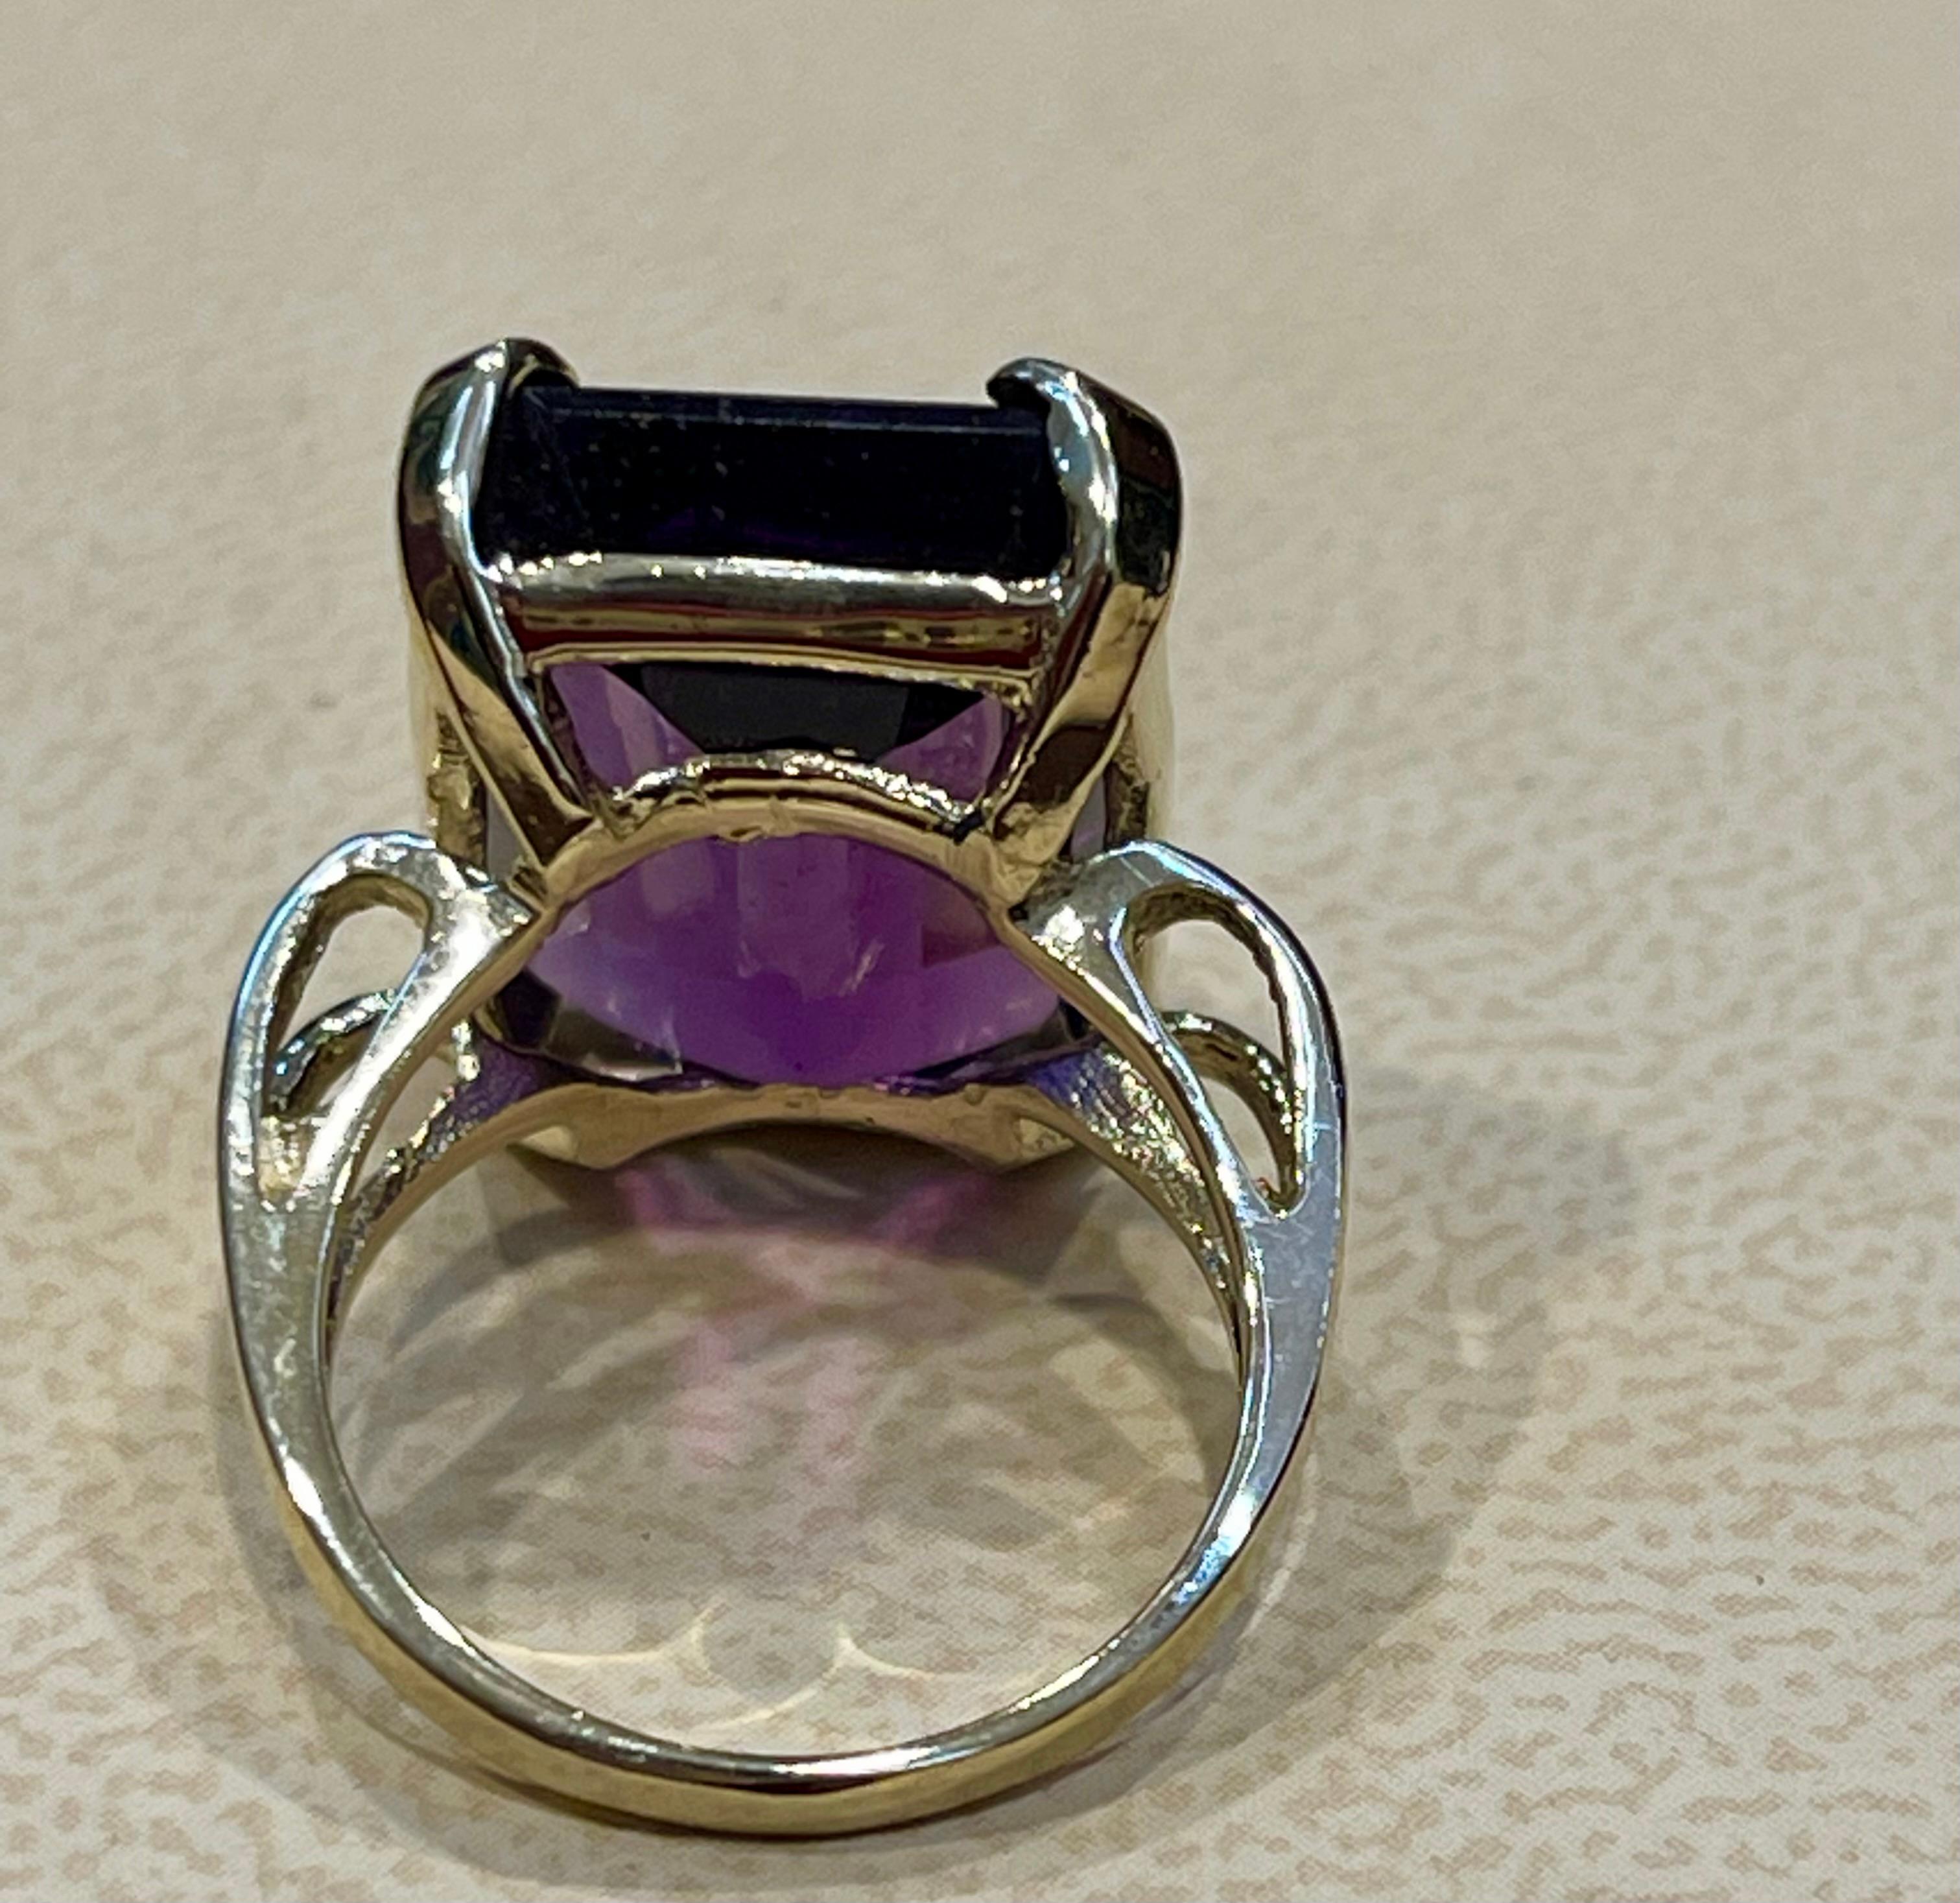 13 Carat Emerald Cut Amethyst Cocktail Ring in 14 Karat Yellow Gold For Sale 8